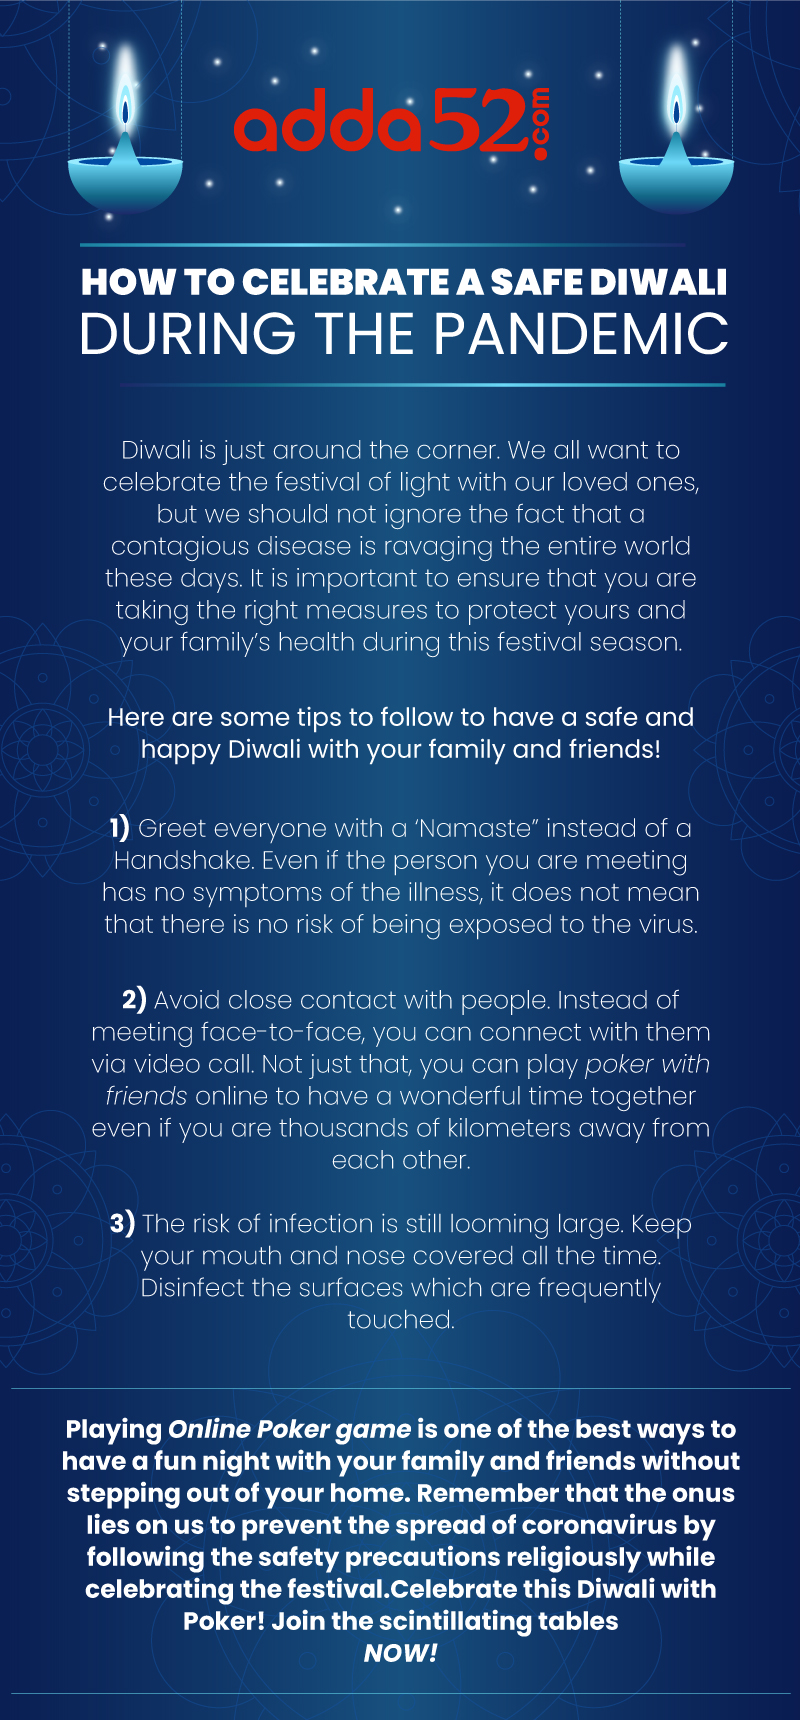 How To Celebrate A Safe Diwali During The Pandemic